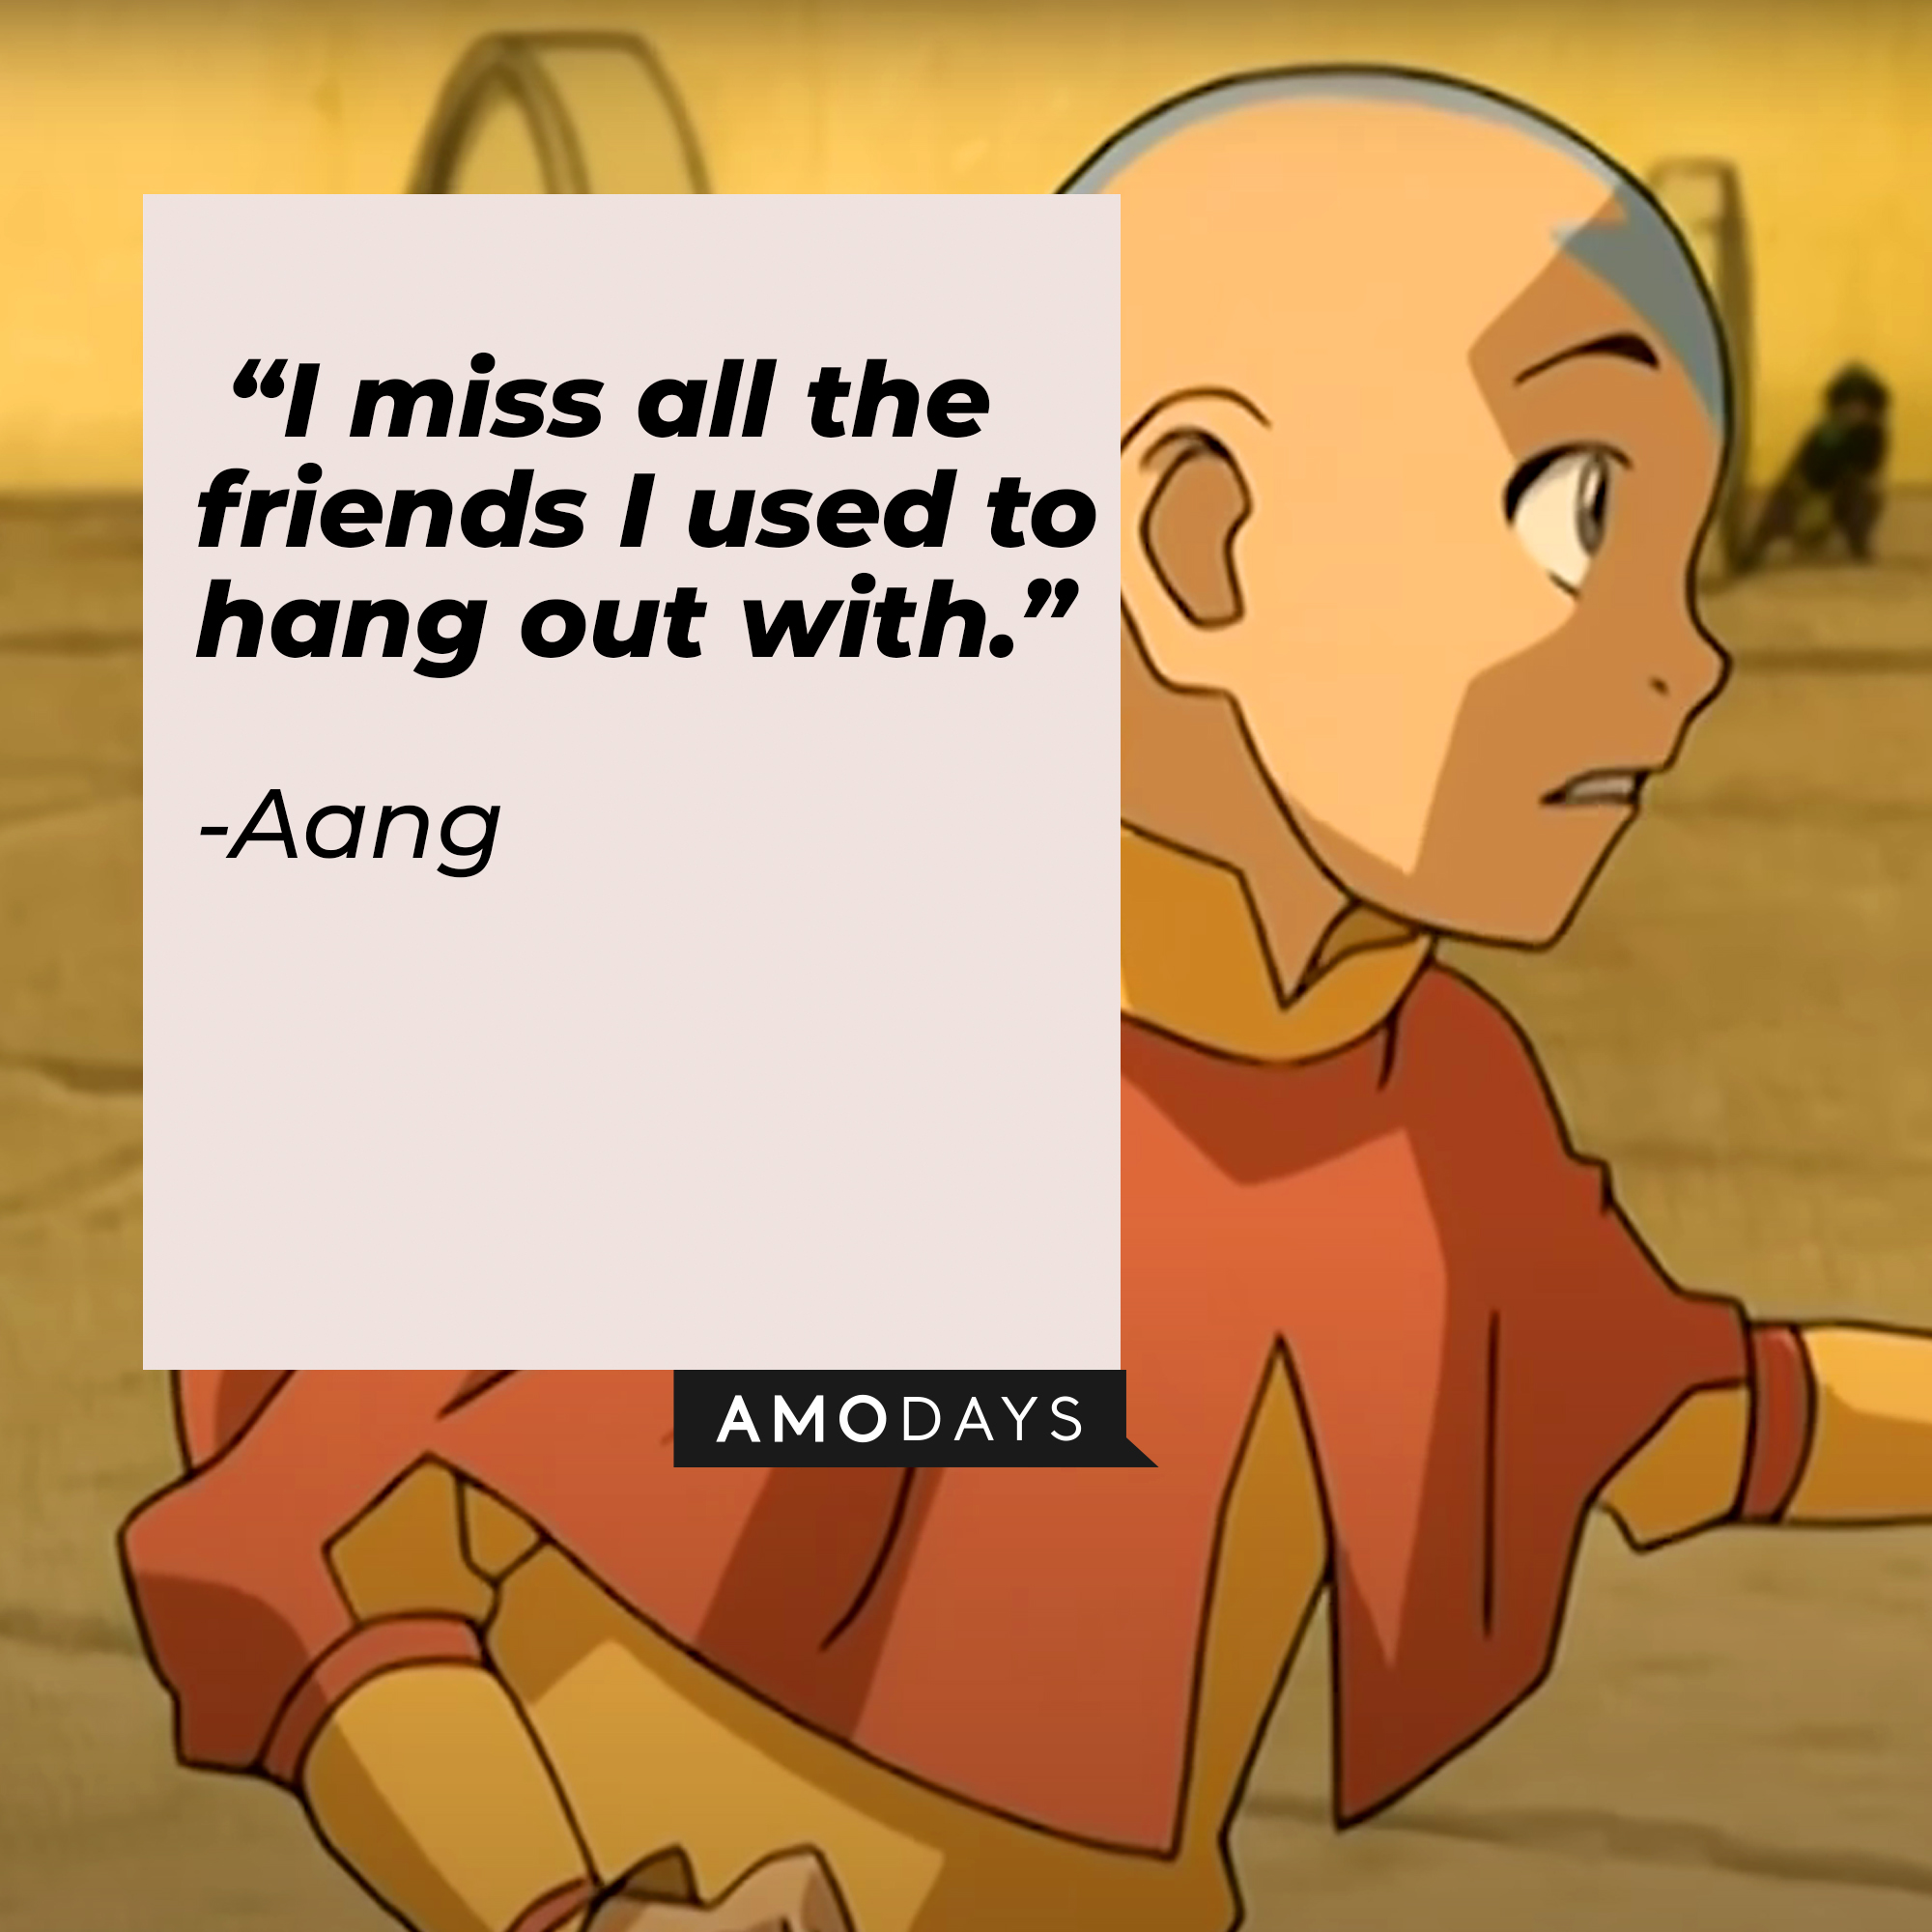 Aang’s quote: “I miss all the friends I used to hang out with.” | Source: Youtube.com/TeamAvatar